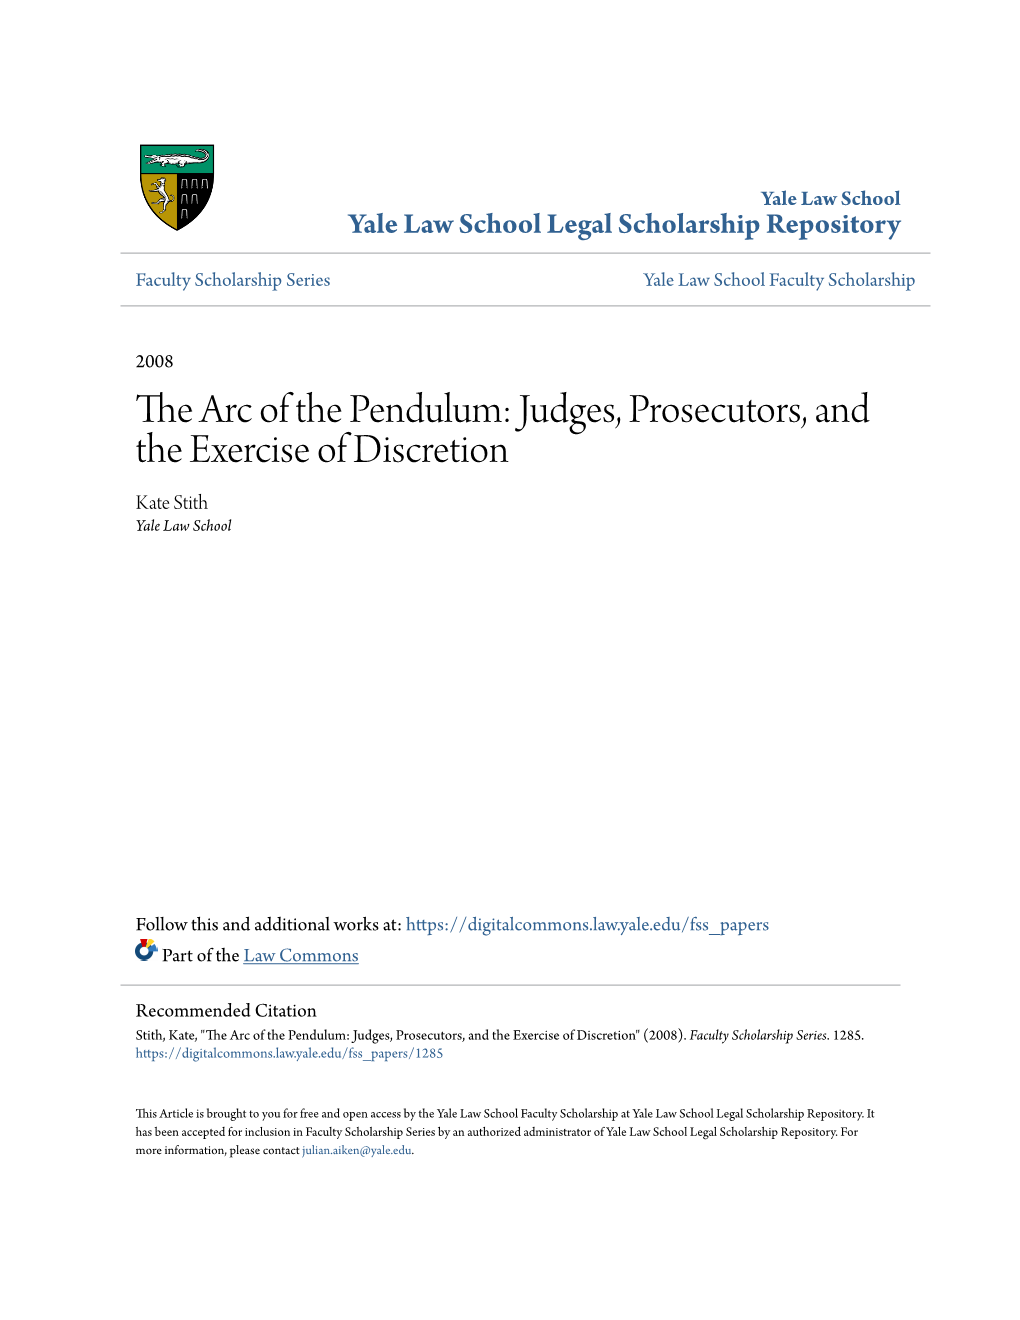 Judges, Prosecutors, and the Exercise of Discretion Kate Stith Yale Law School